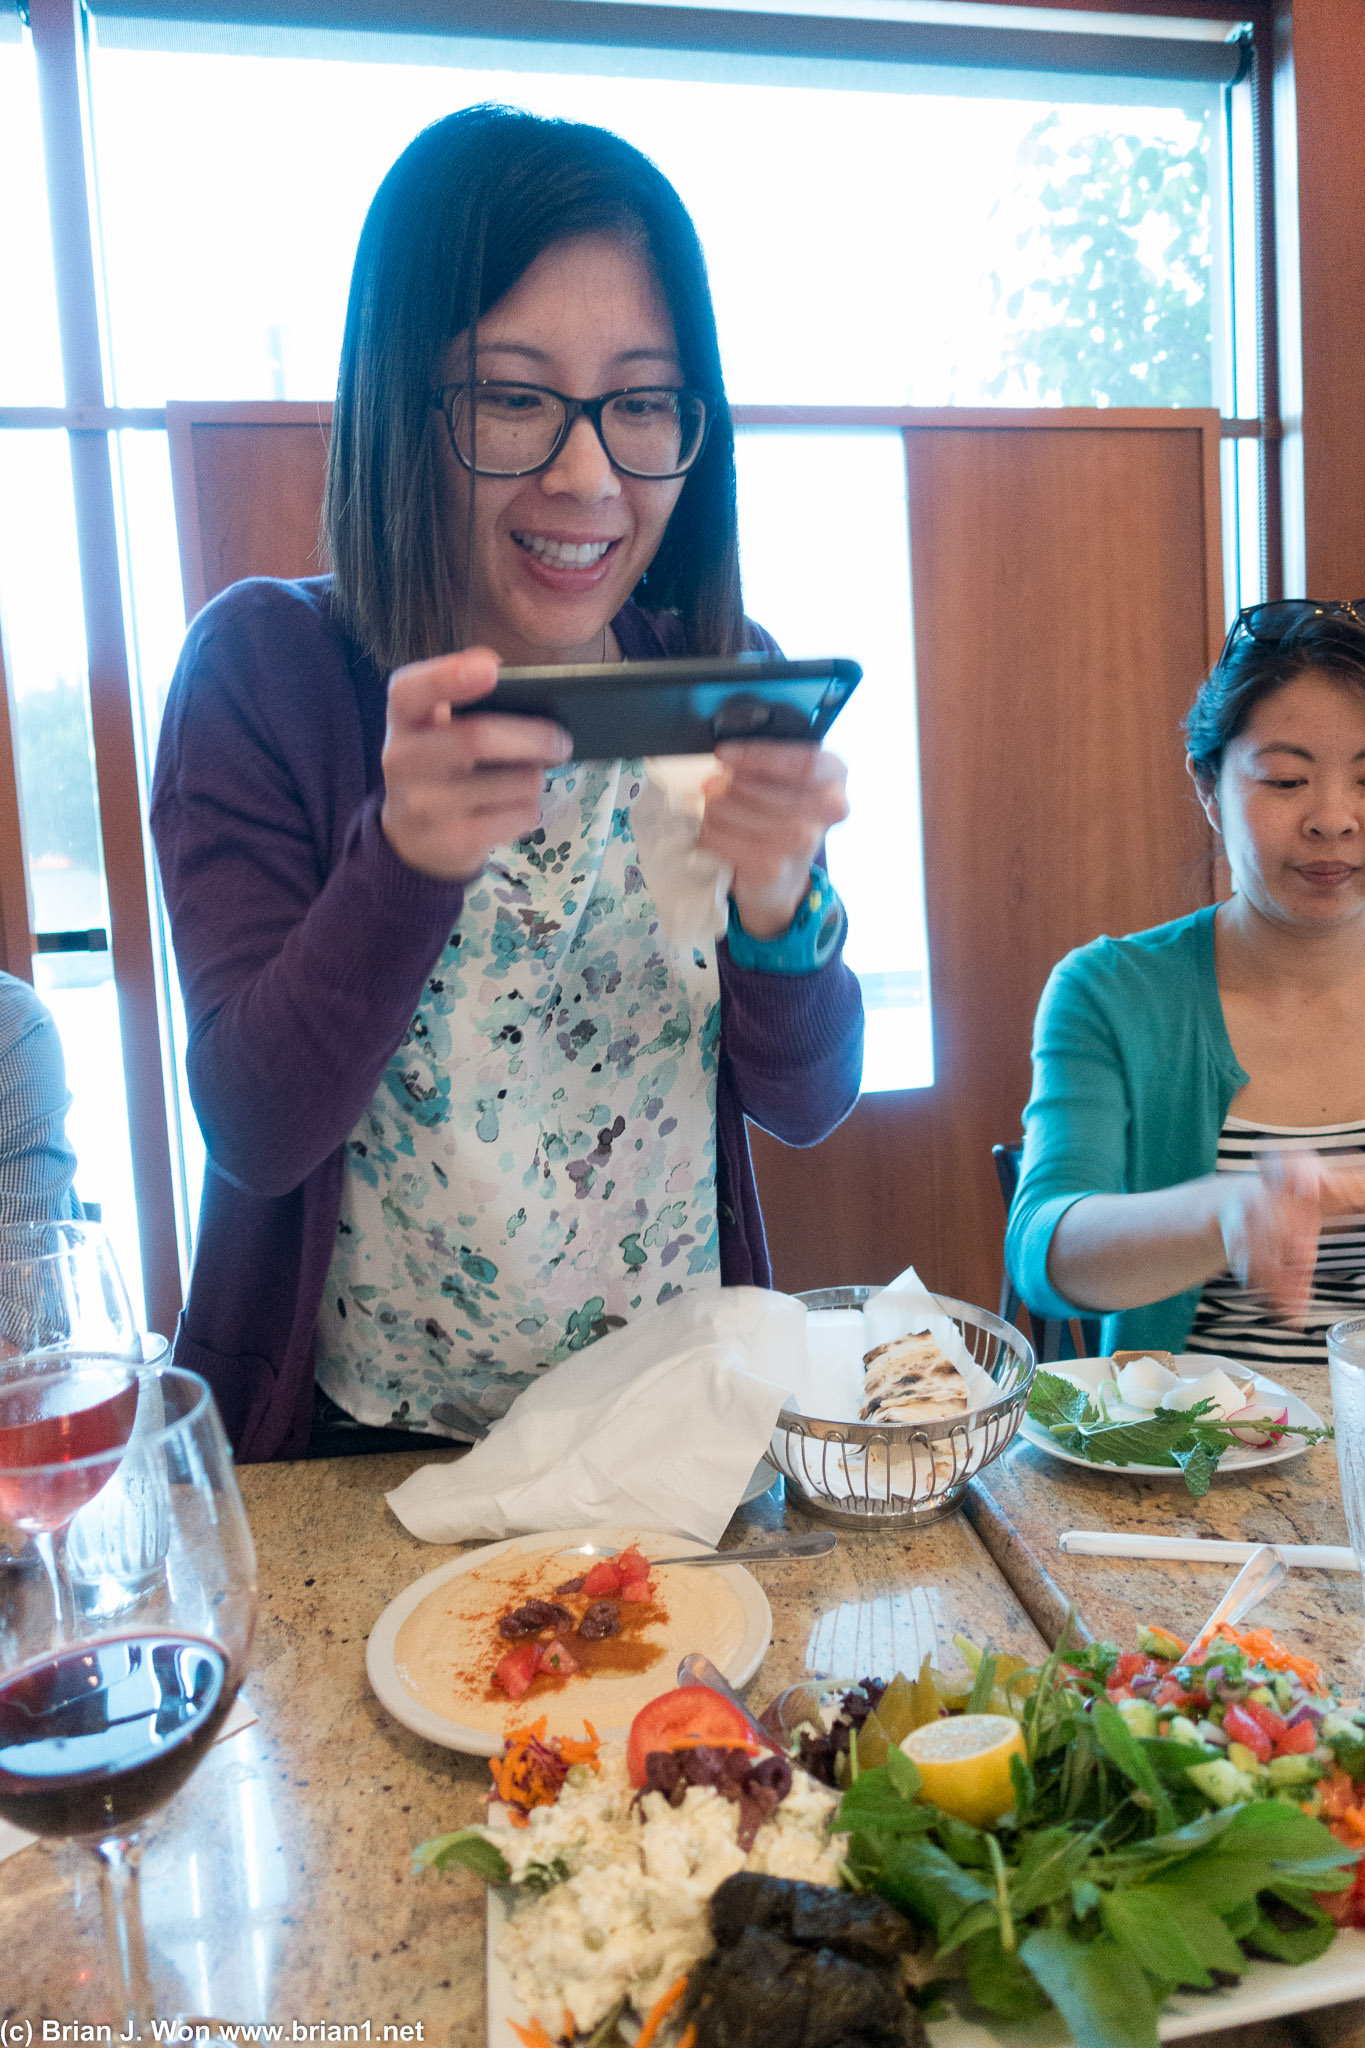 More Asians taking photos of food.